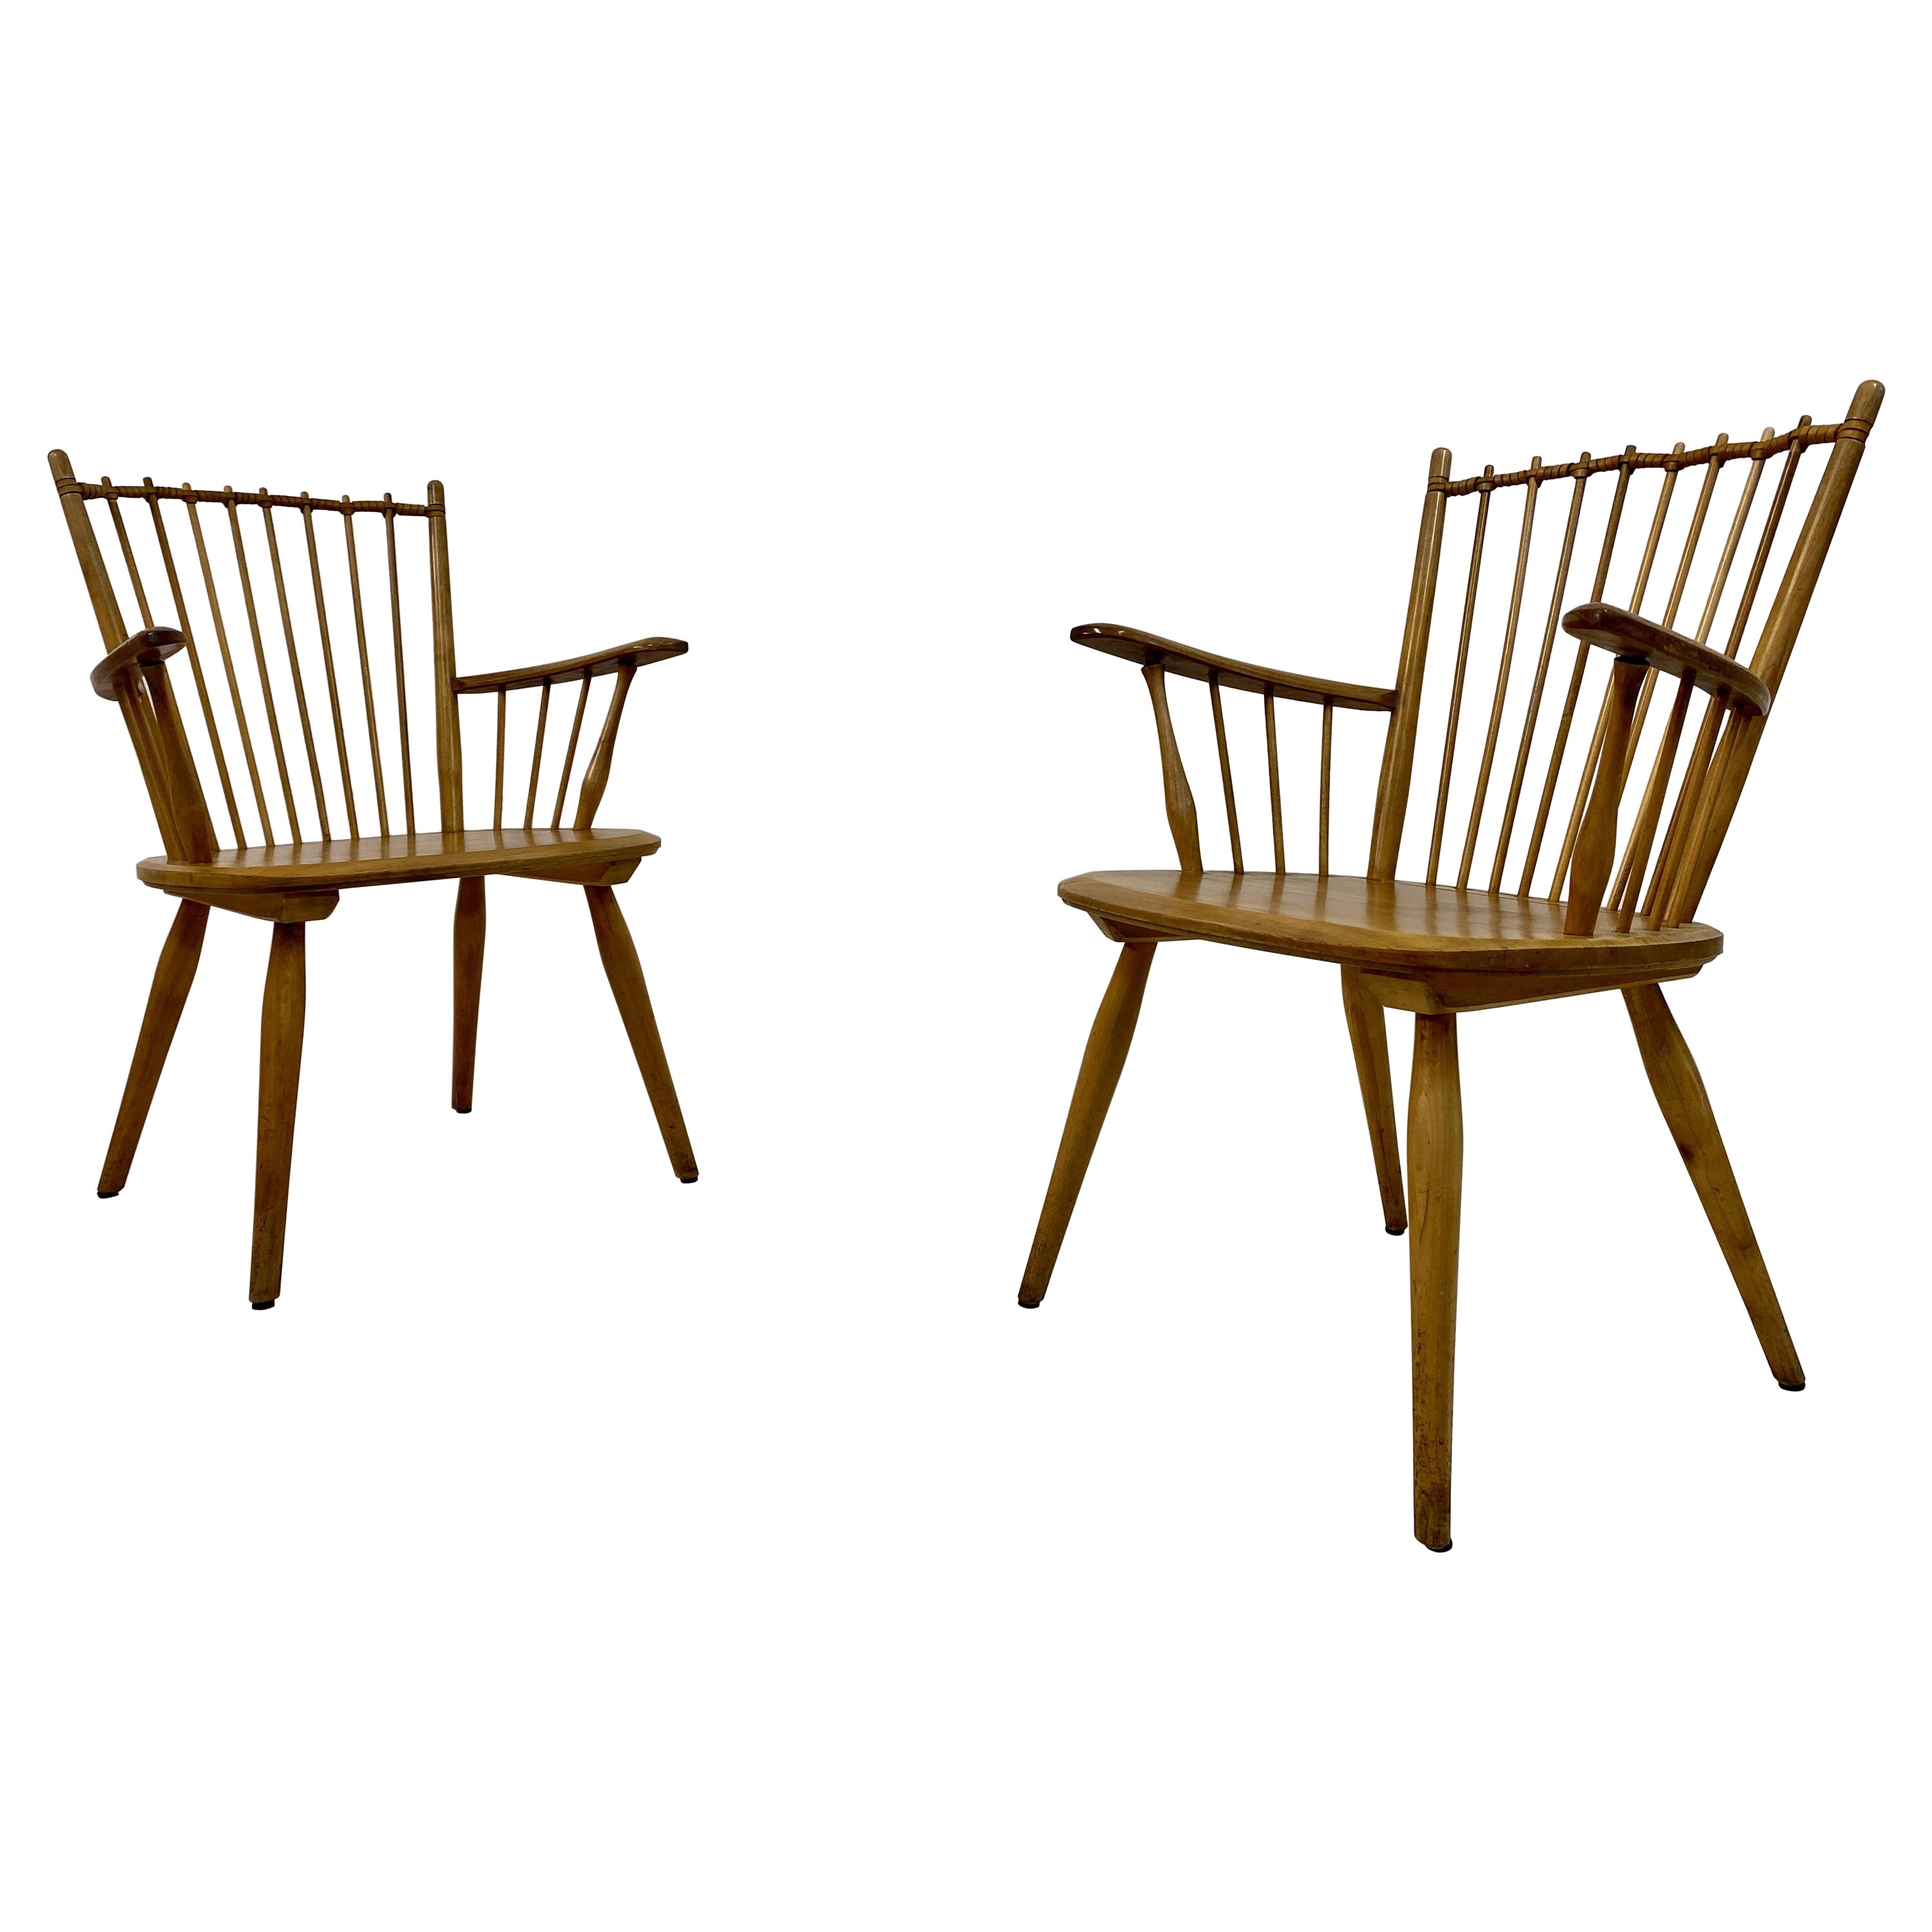 Pair of 1950s Cherry Wood Armchairs by Albert Haberer For Sale